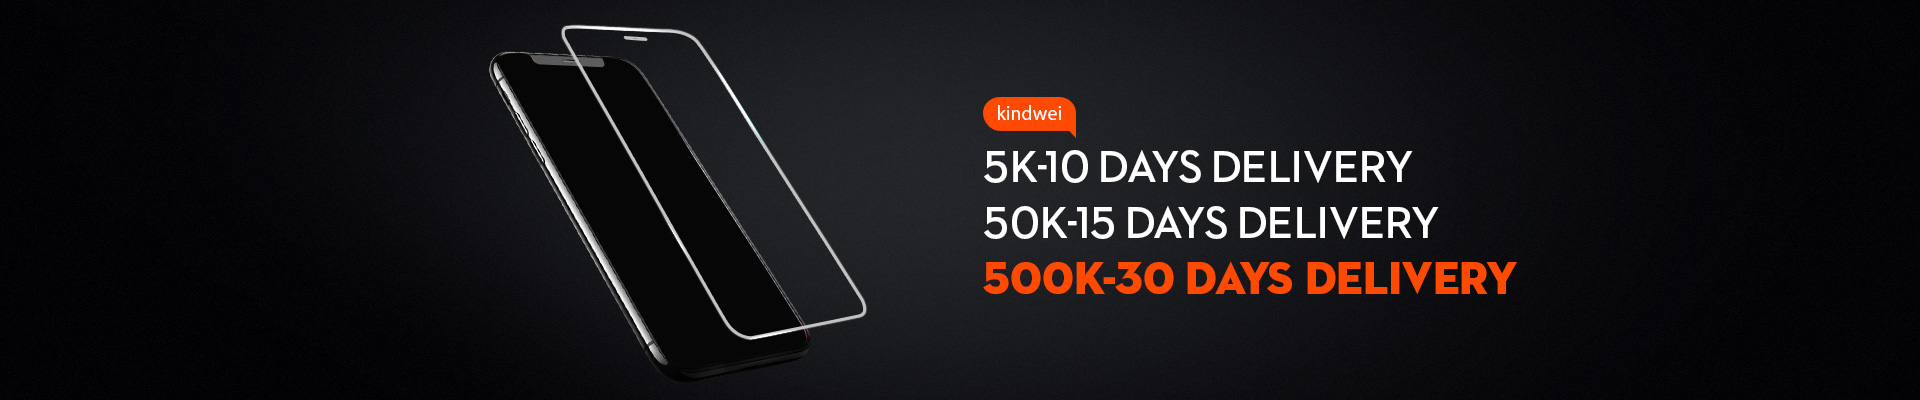 500K-30 DAYS DELIVERY